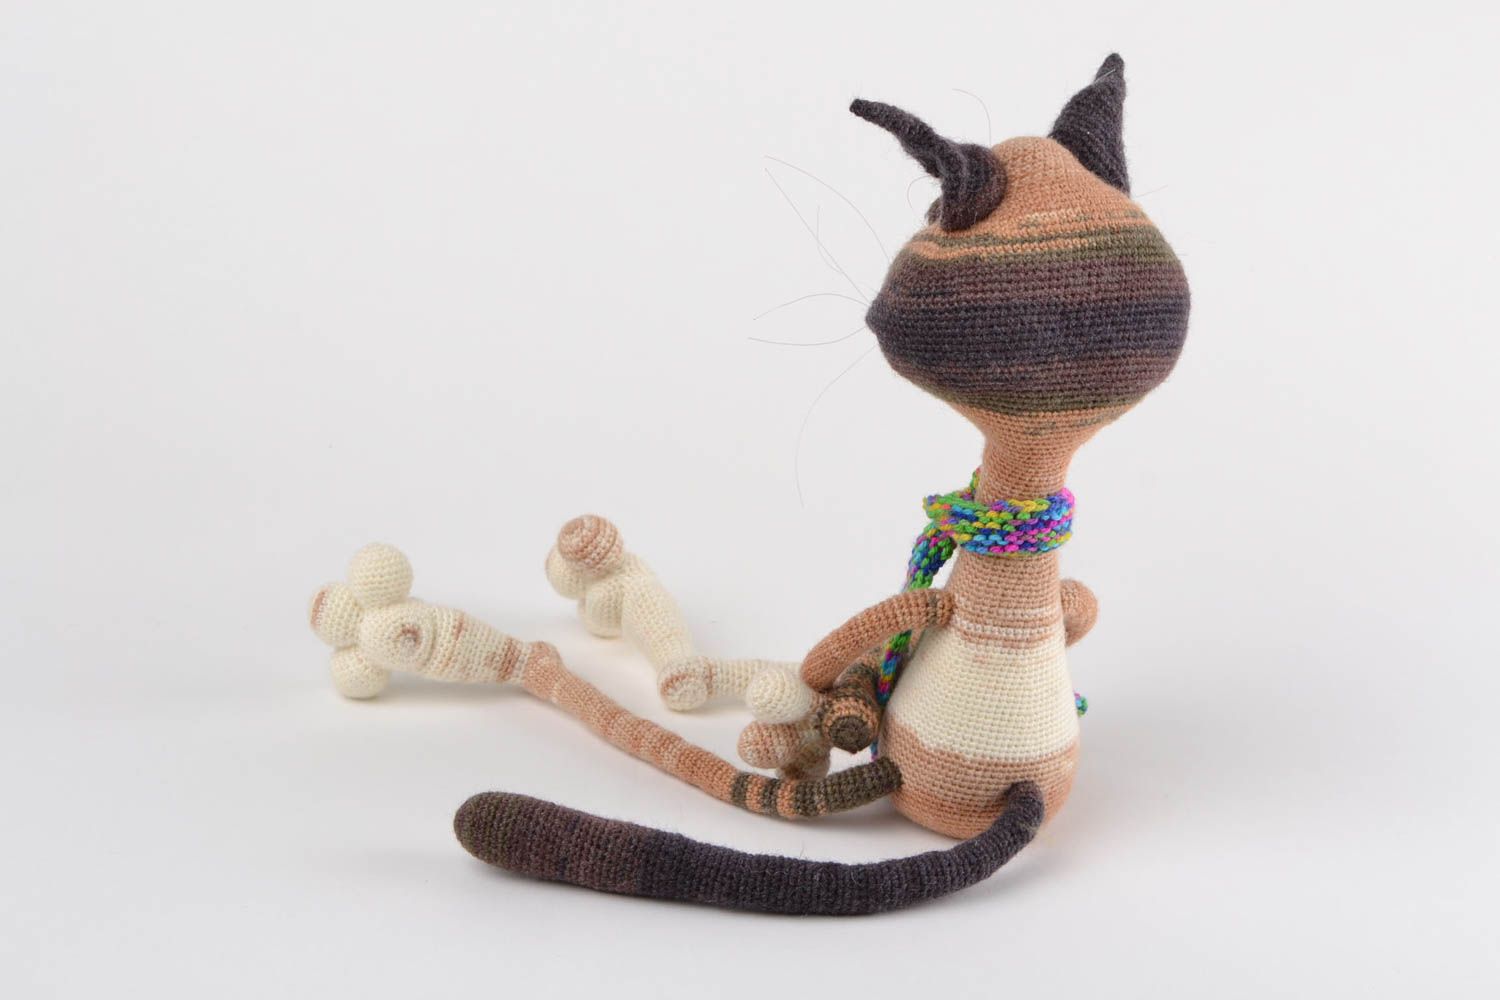 Handmade crocheted soft toy cat made of acrylic yarns for home decor and games photo 4